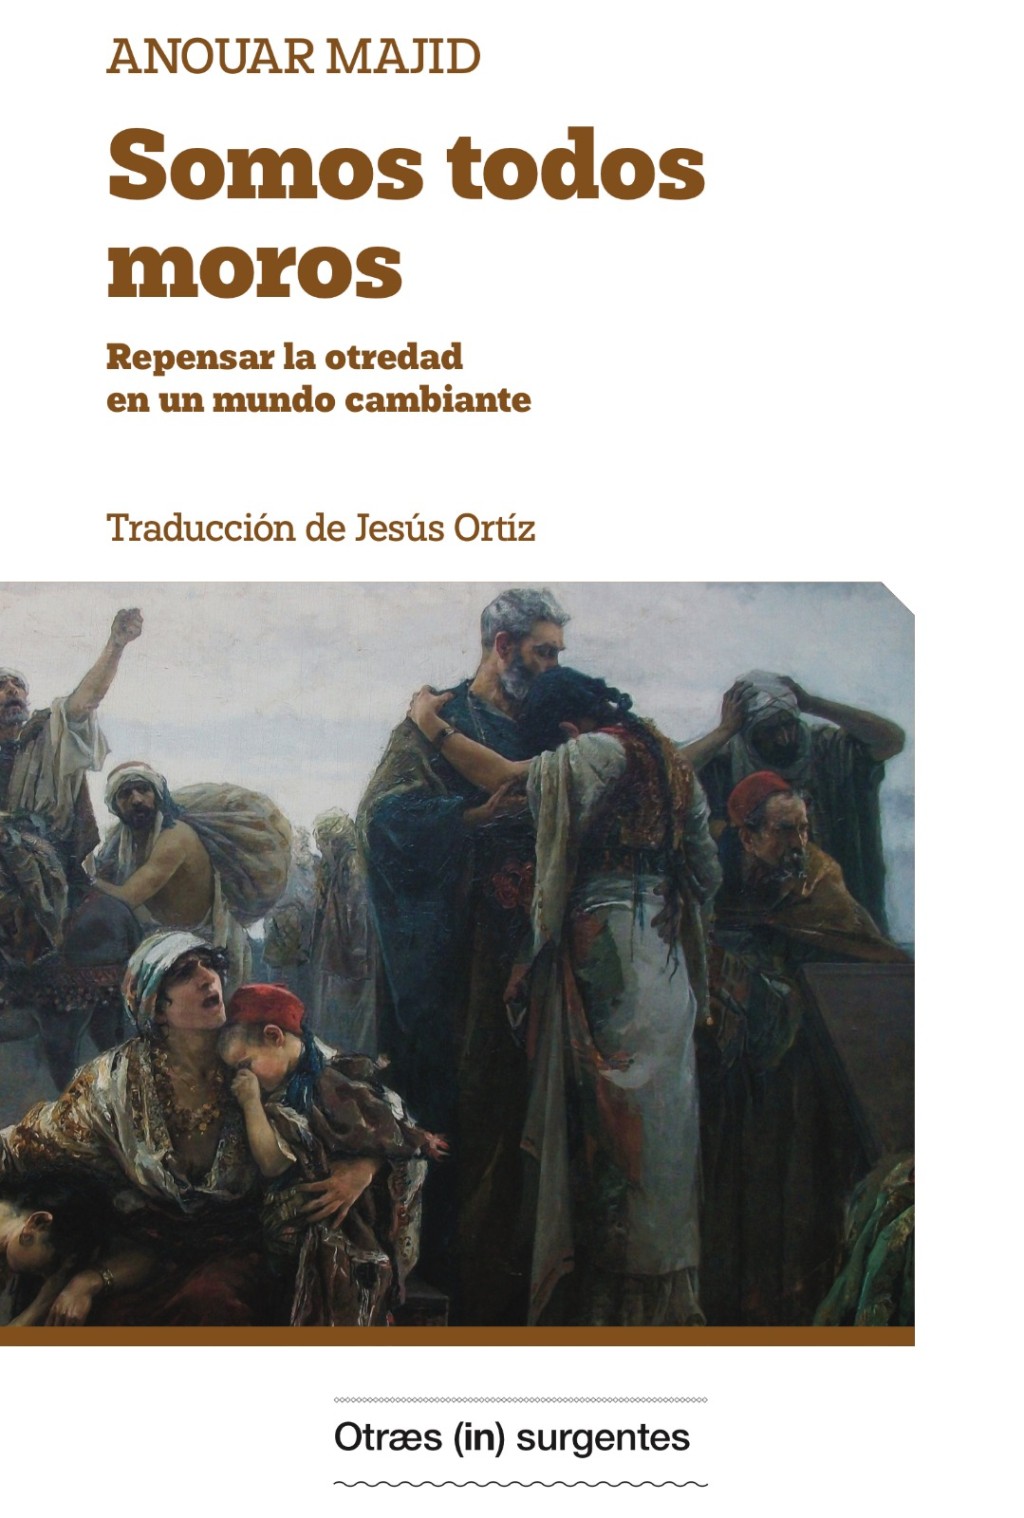 "We Are All Moors" book cover in Spanish